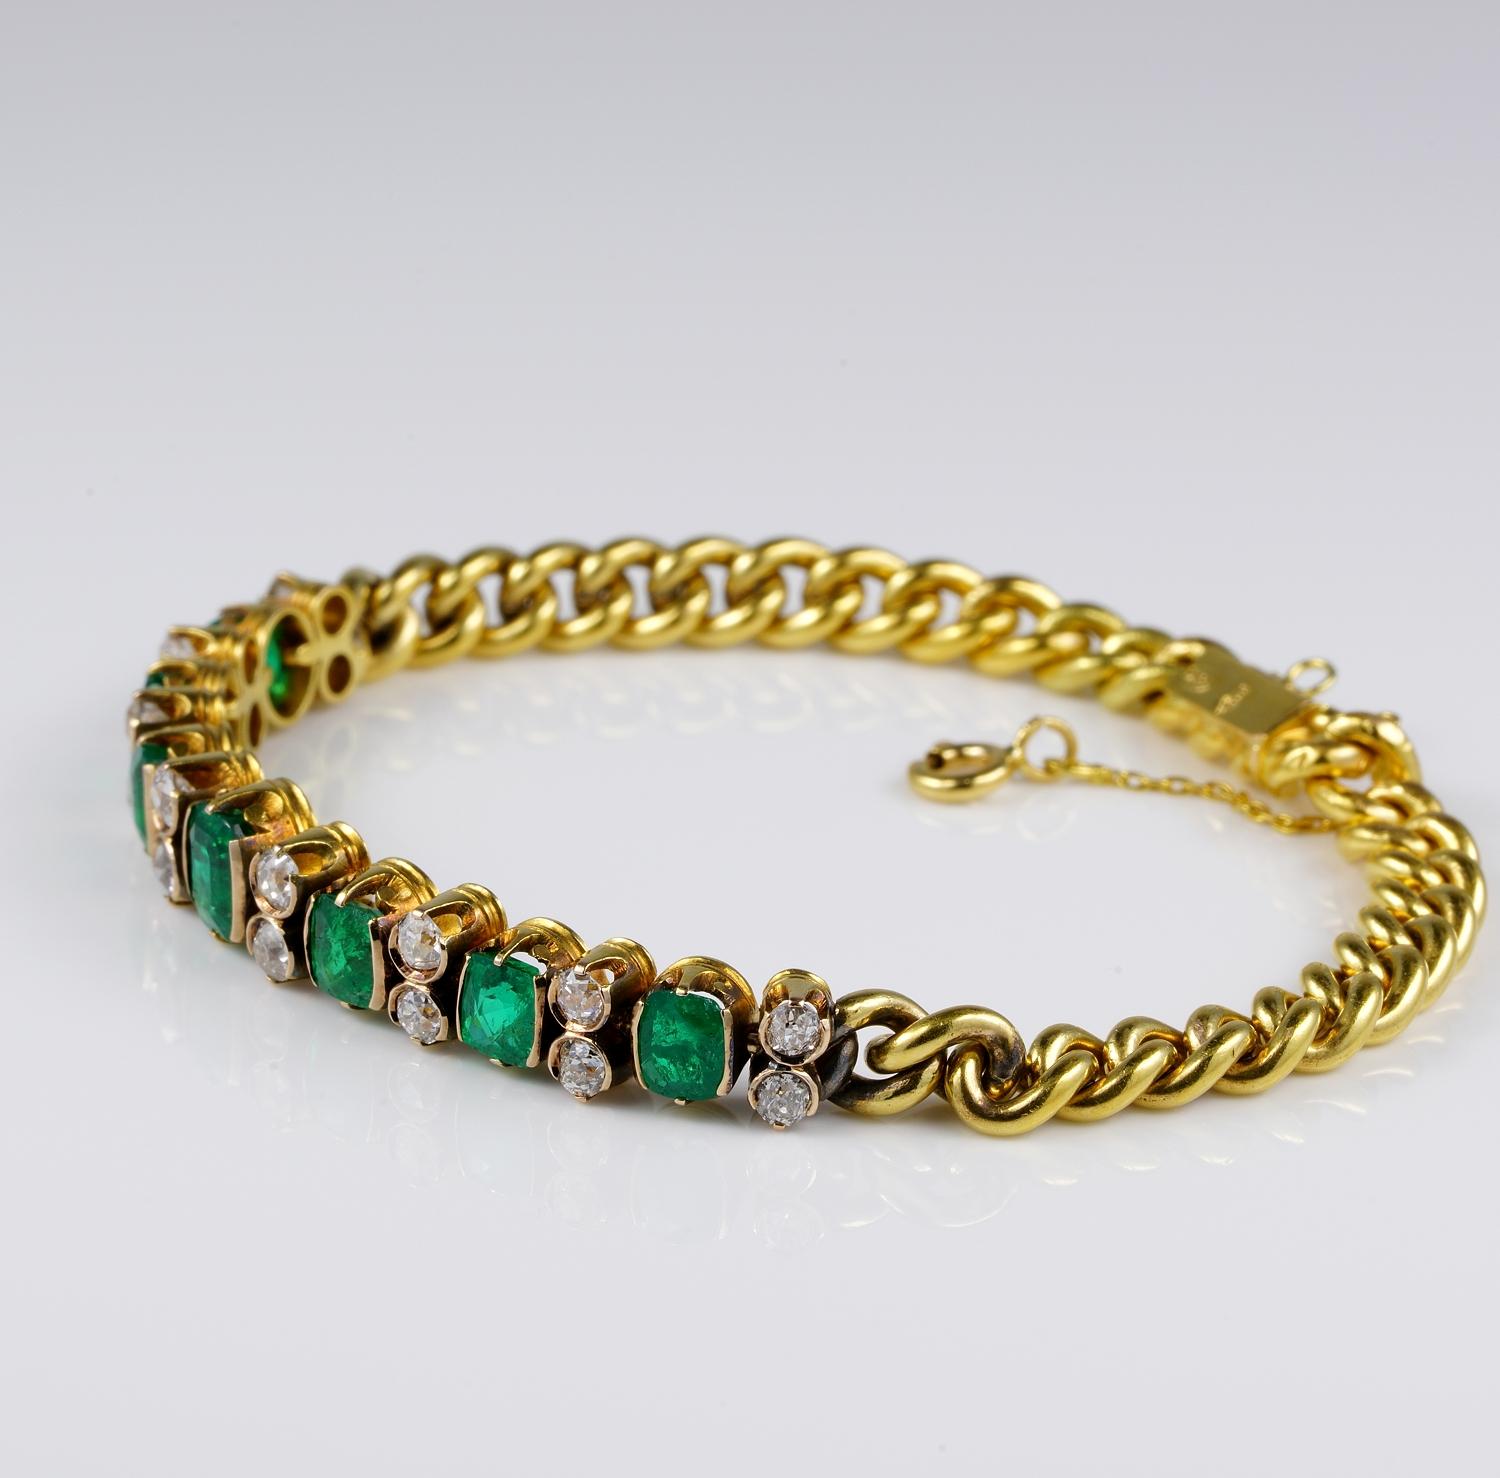 Victorian Treasure!
Absolutely stunning Victorian find, precious and very wearable 18 KT solid gold bracelet

Preciously made by the front array of natural Colombian Emeralds and old mine cut Diamonds connected by a rare Victorian solid gold curb